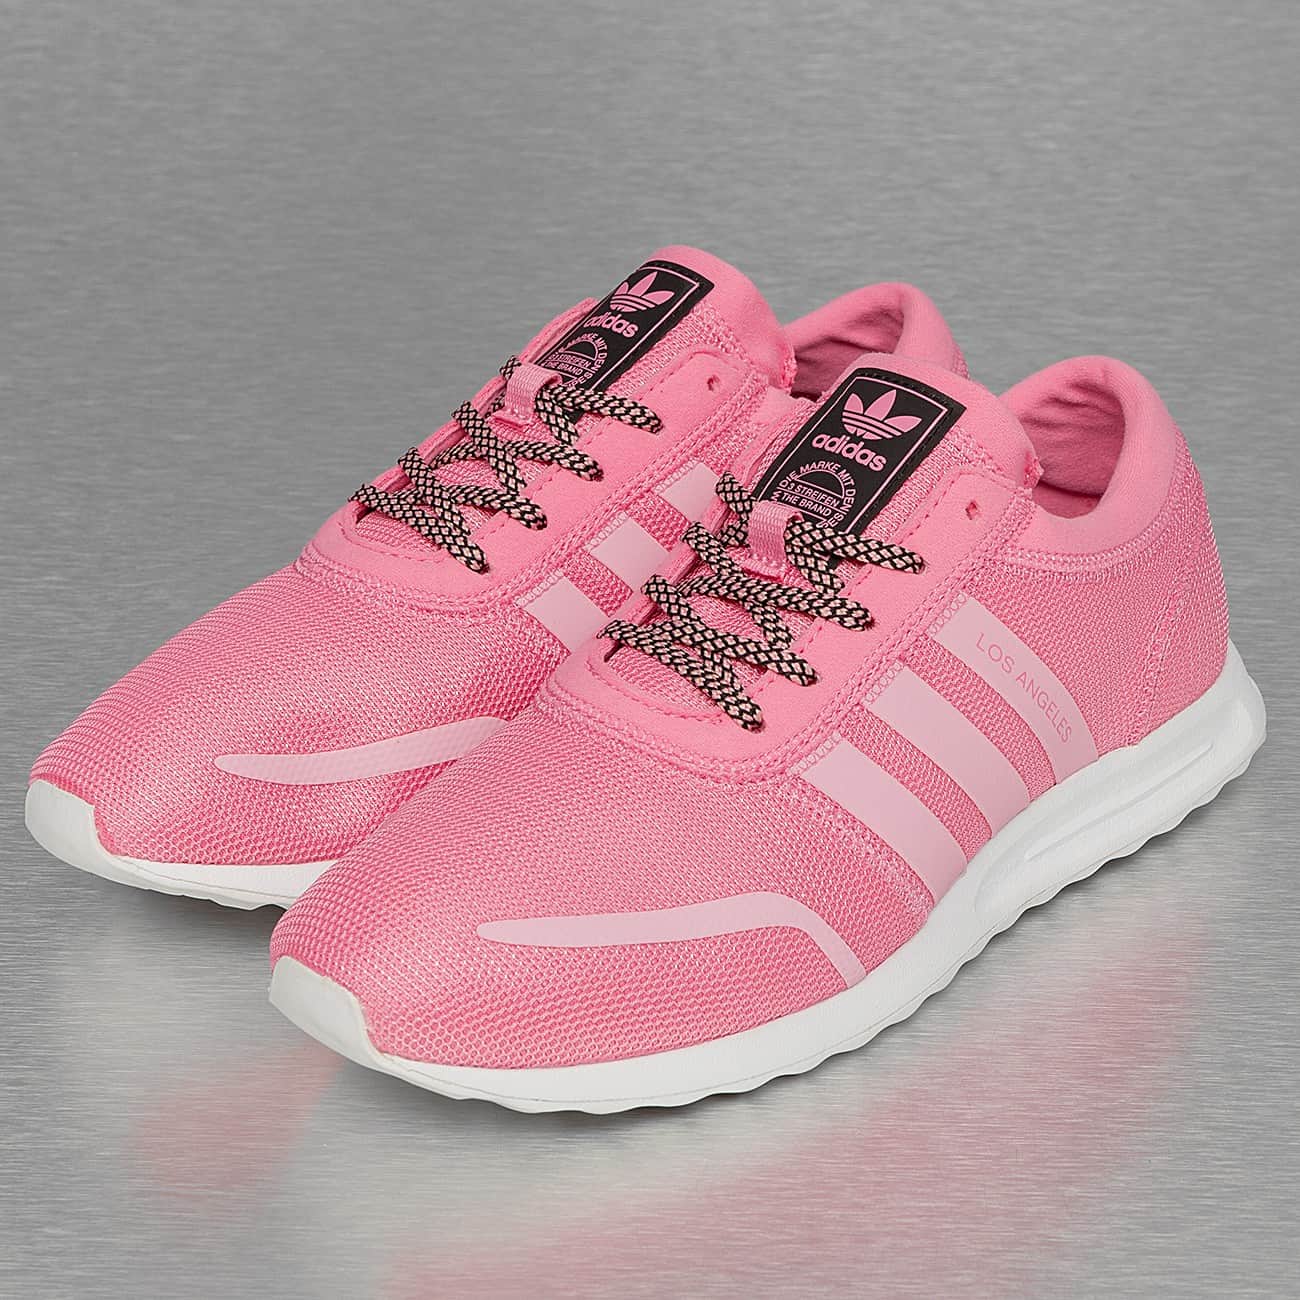 adidas-los-angeles-j-sneakers-easy-pink-easy-pink-ftwr-white